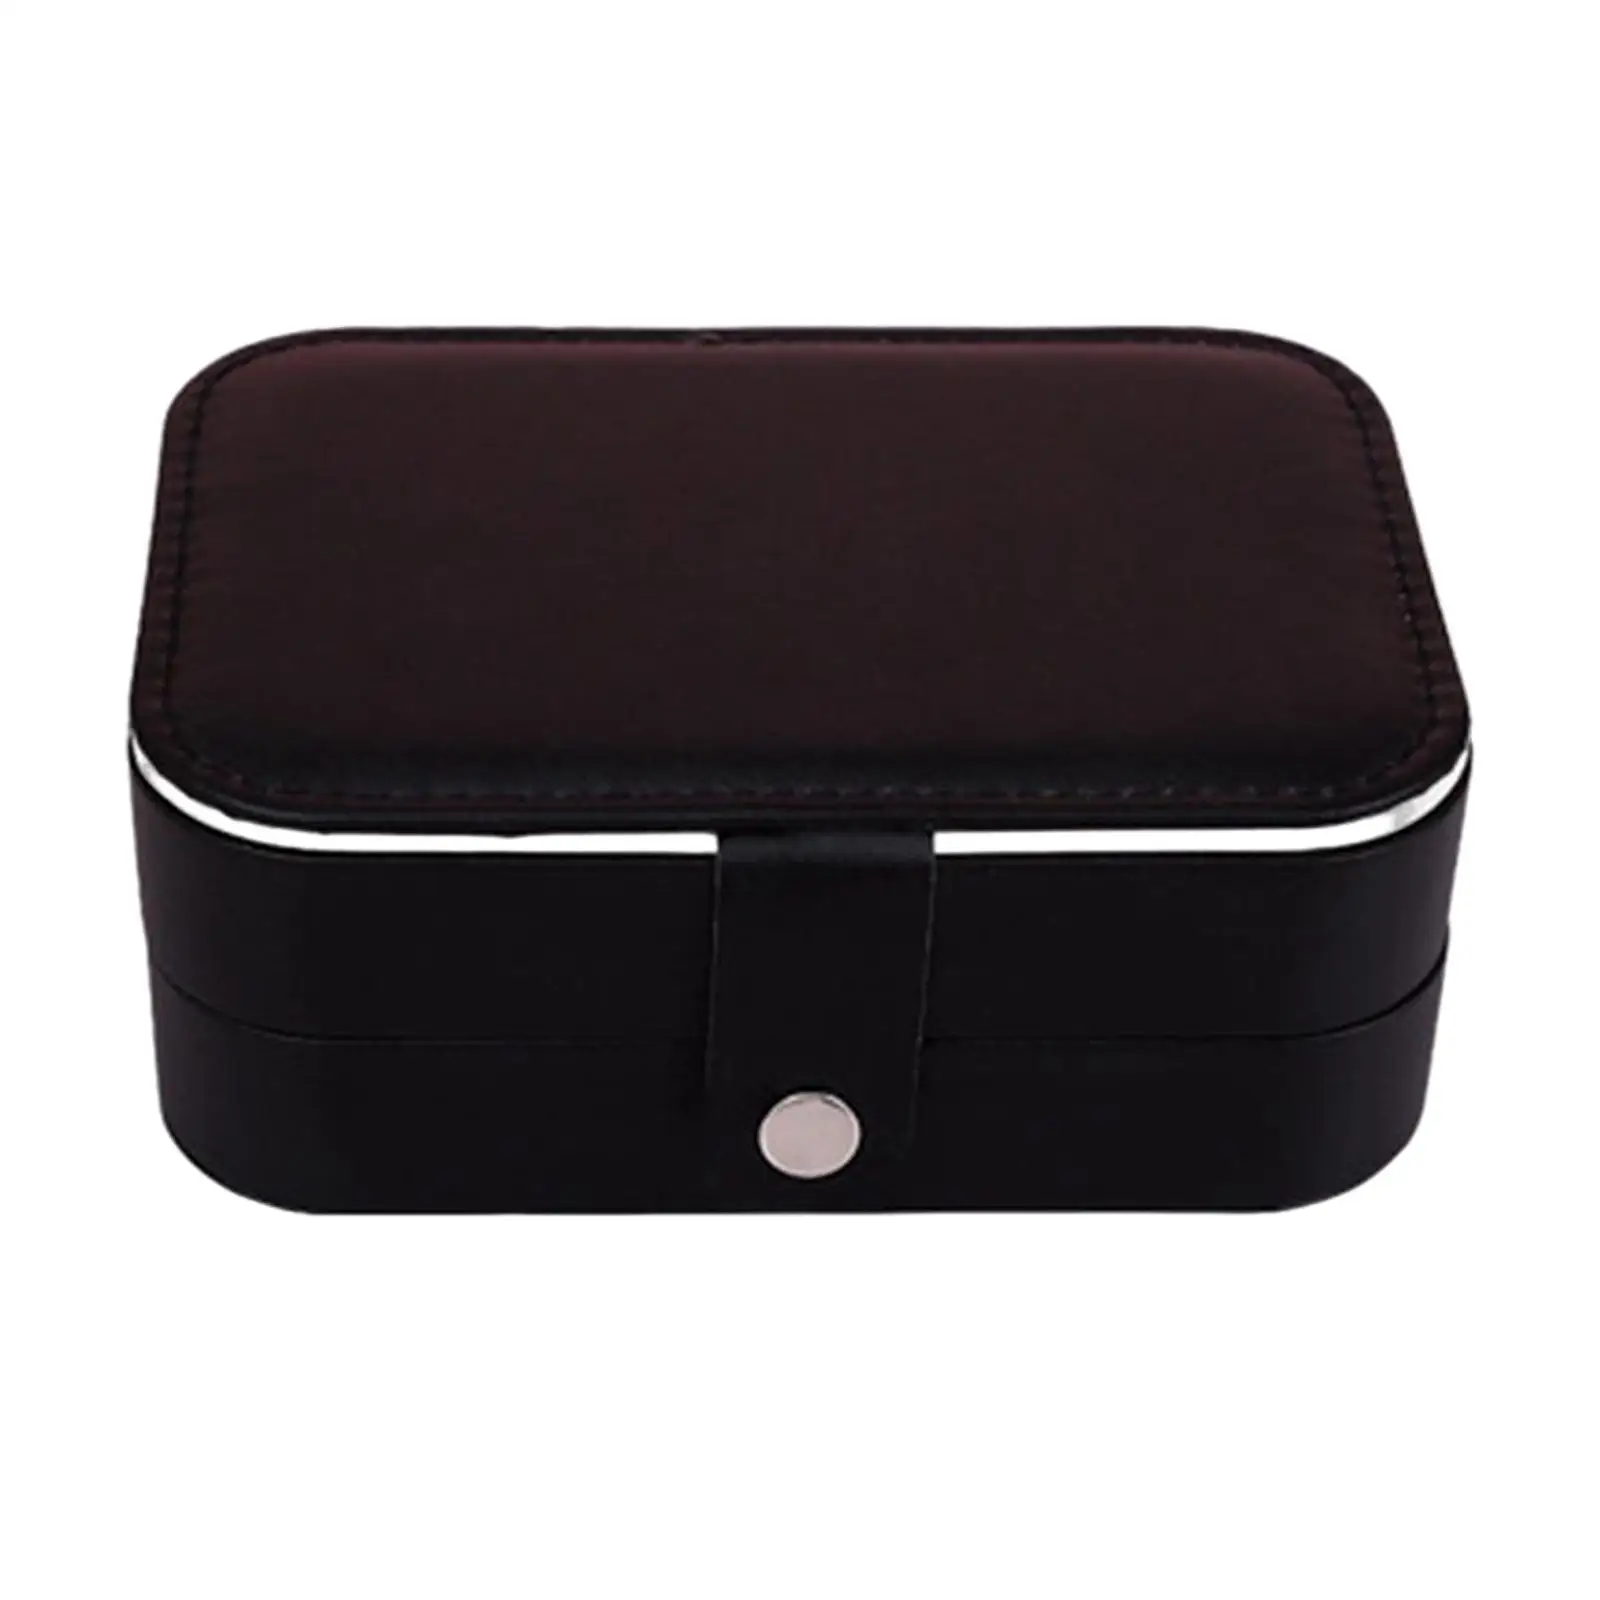 2 Layers Jewelry Box Large Capacity PU Leather Display Storage Case for Studs Jewellery Care Travel Storage Jewellery Storage